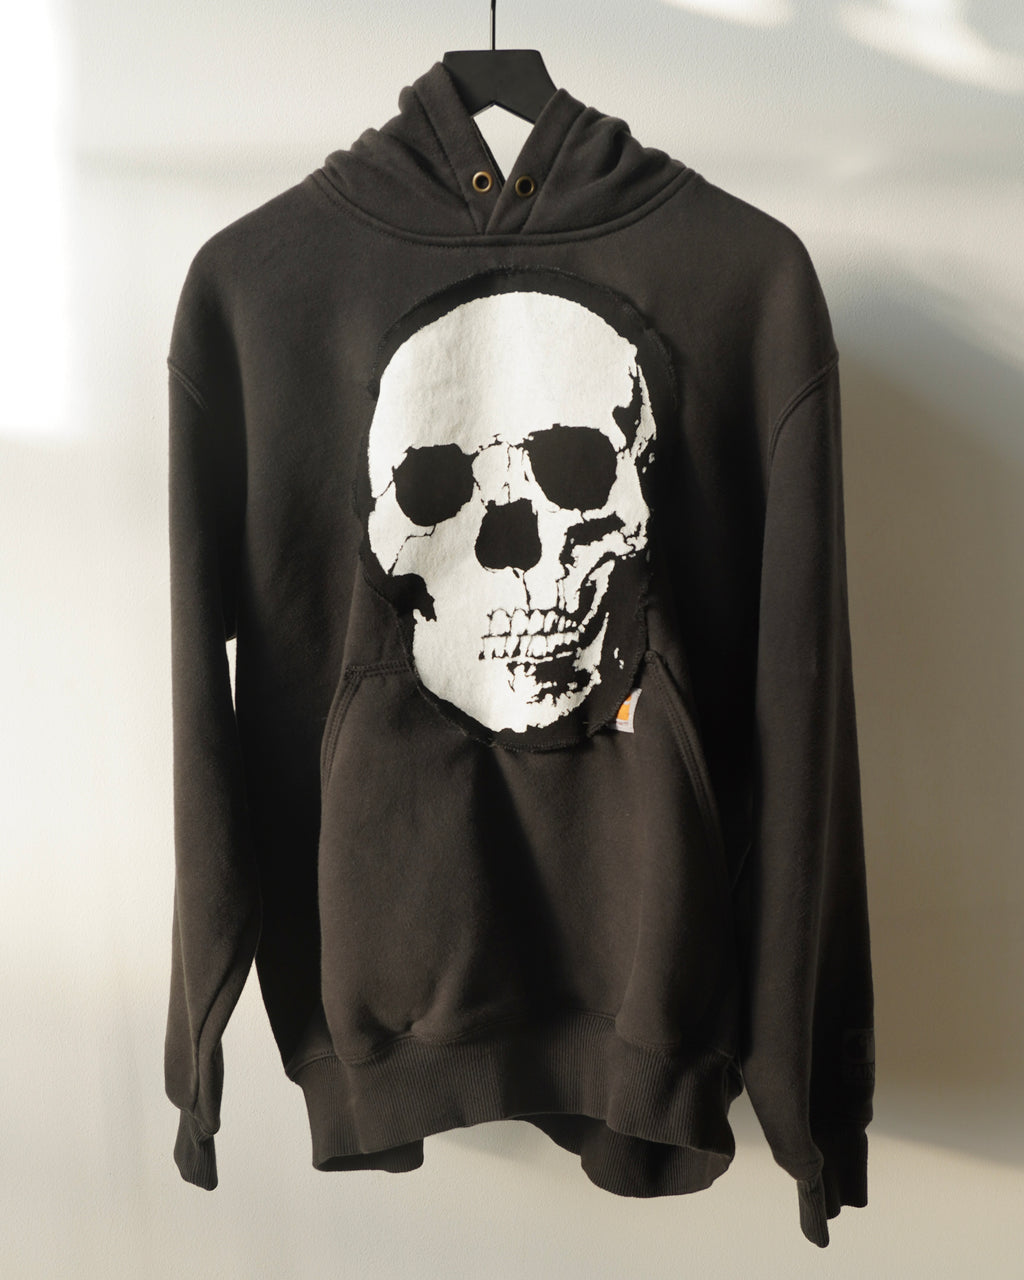 WSL Customized Vintage Carhartt “H.O.T.” Spine Hoody w/ Removable Skull Patch